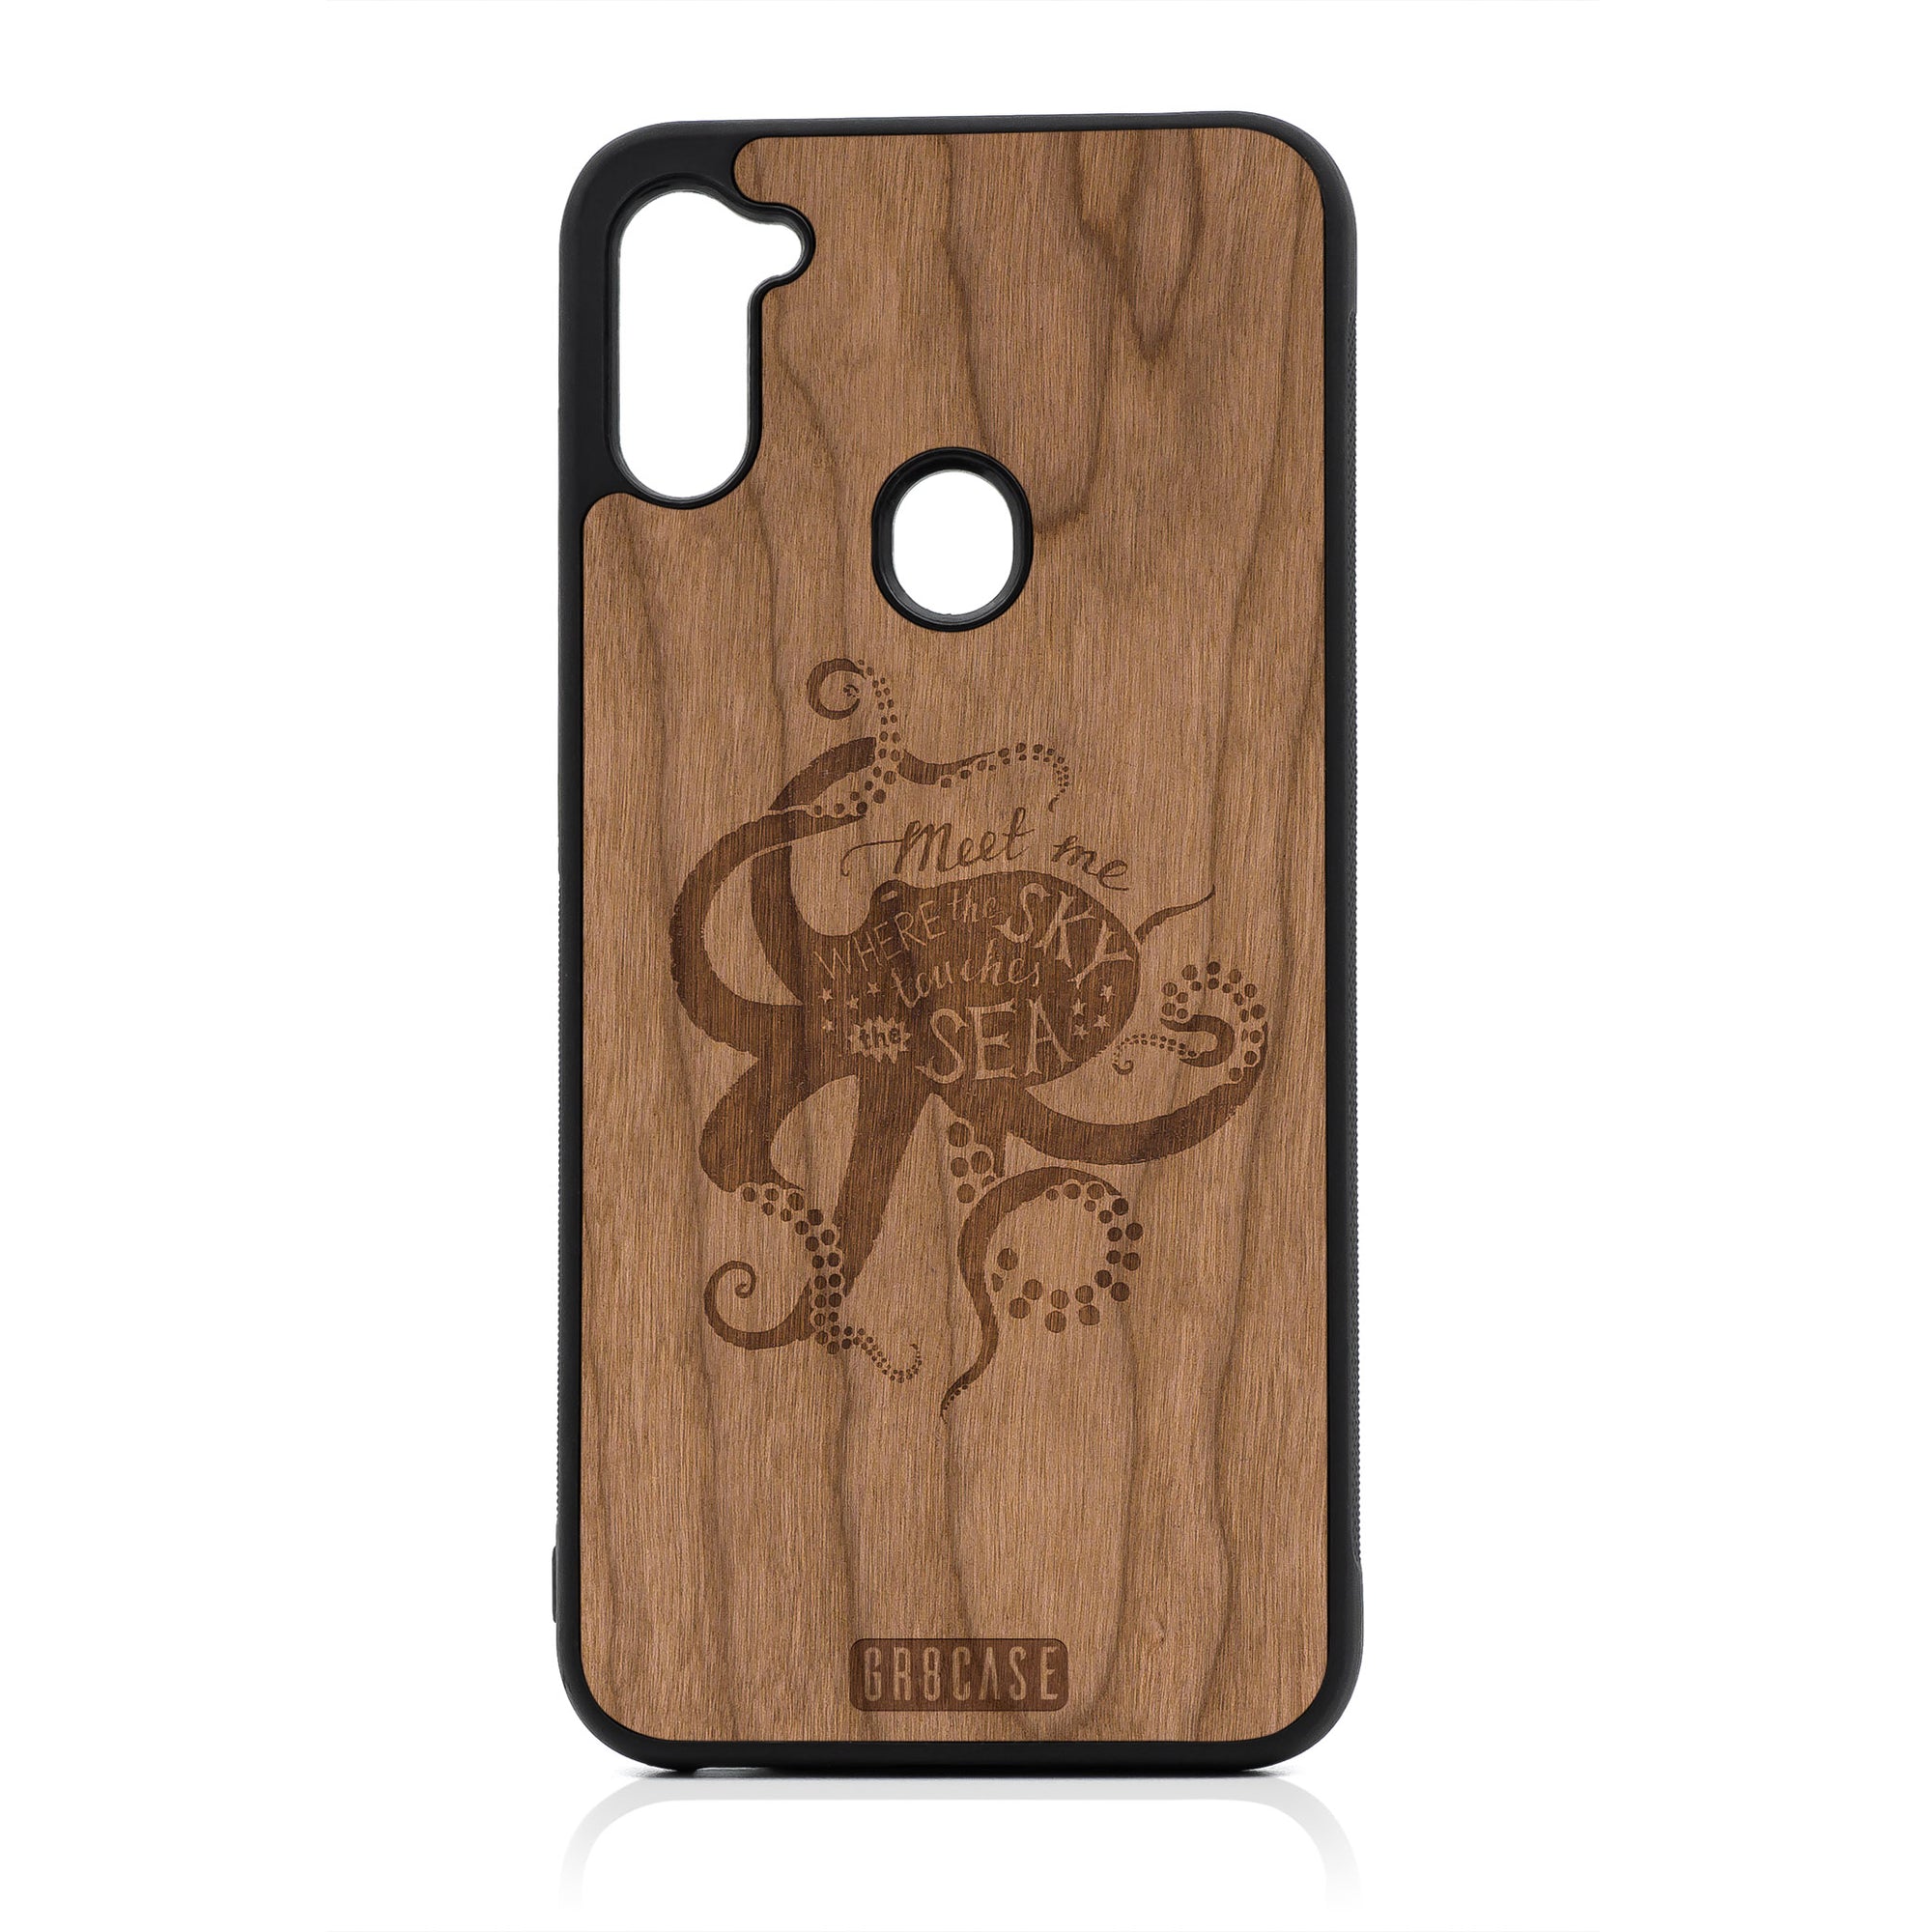 Meet Me Where The Sky Touches The Sea (Octopus) Design Wood Case For Samsung Galaxy A11